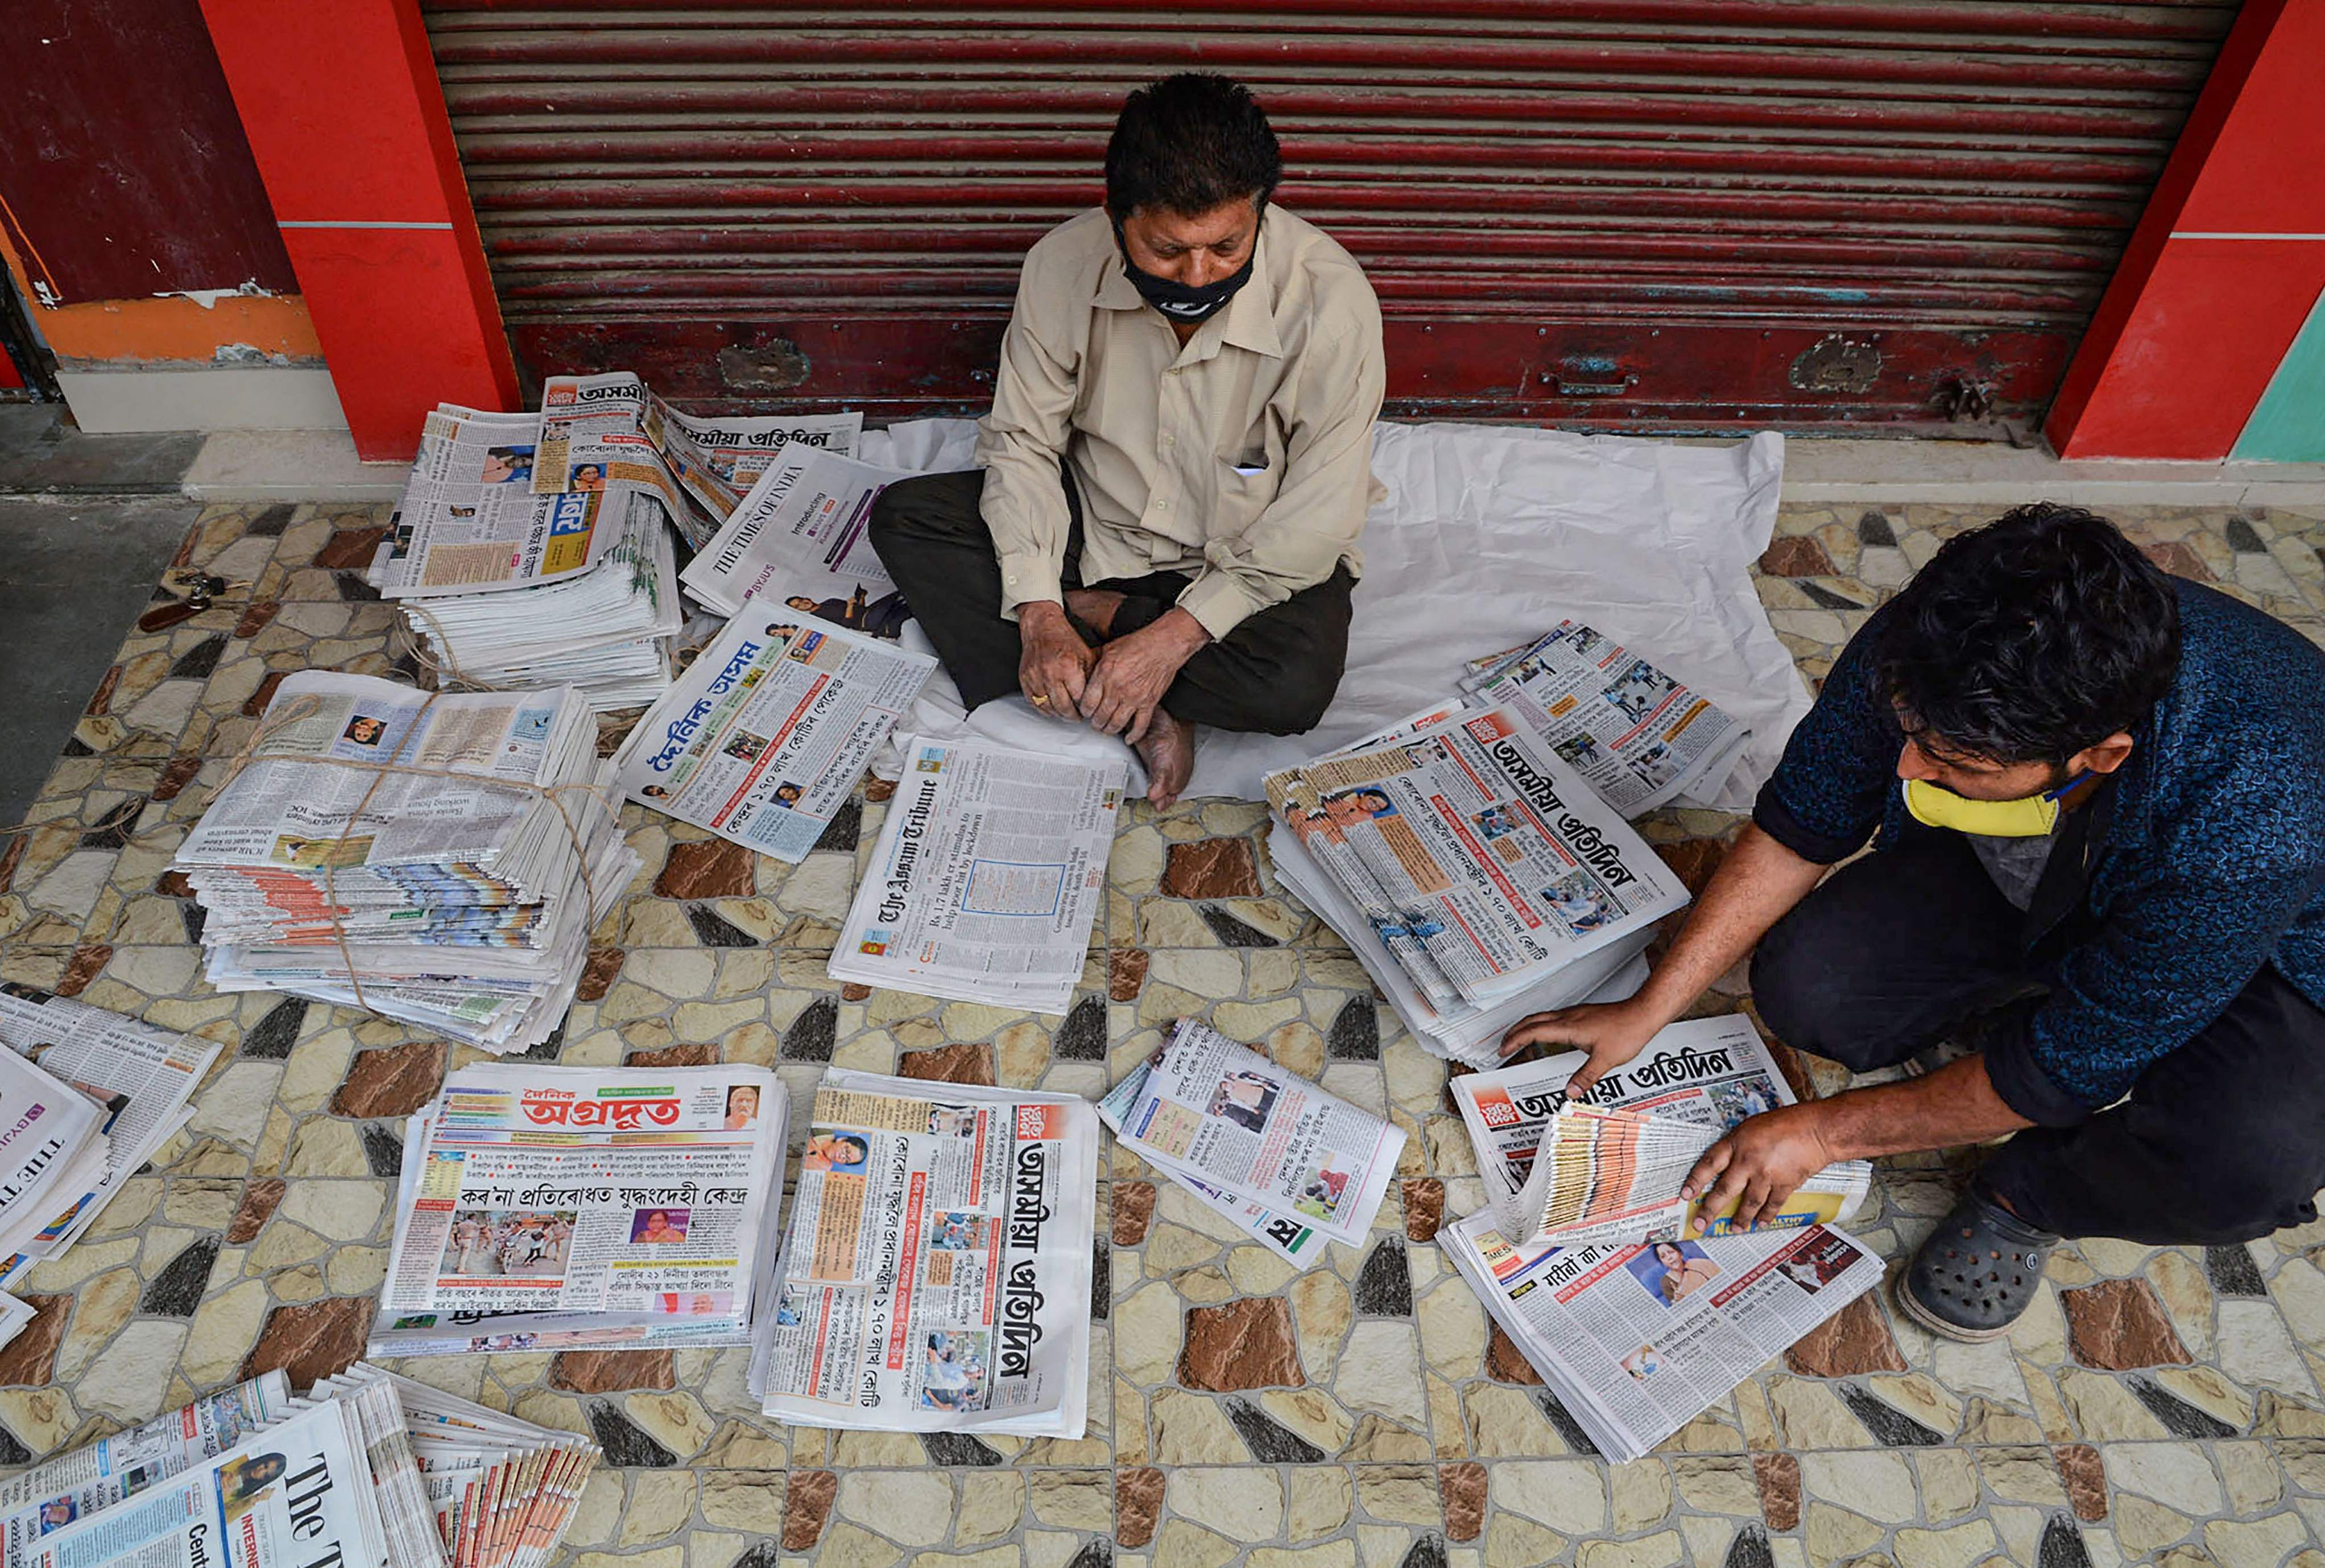 Vendors arrange different vernacular newspaper before delivering it to customers during the nationwide lockdown in Guwahati. (Credit: PTI)